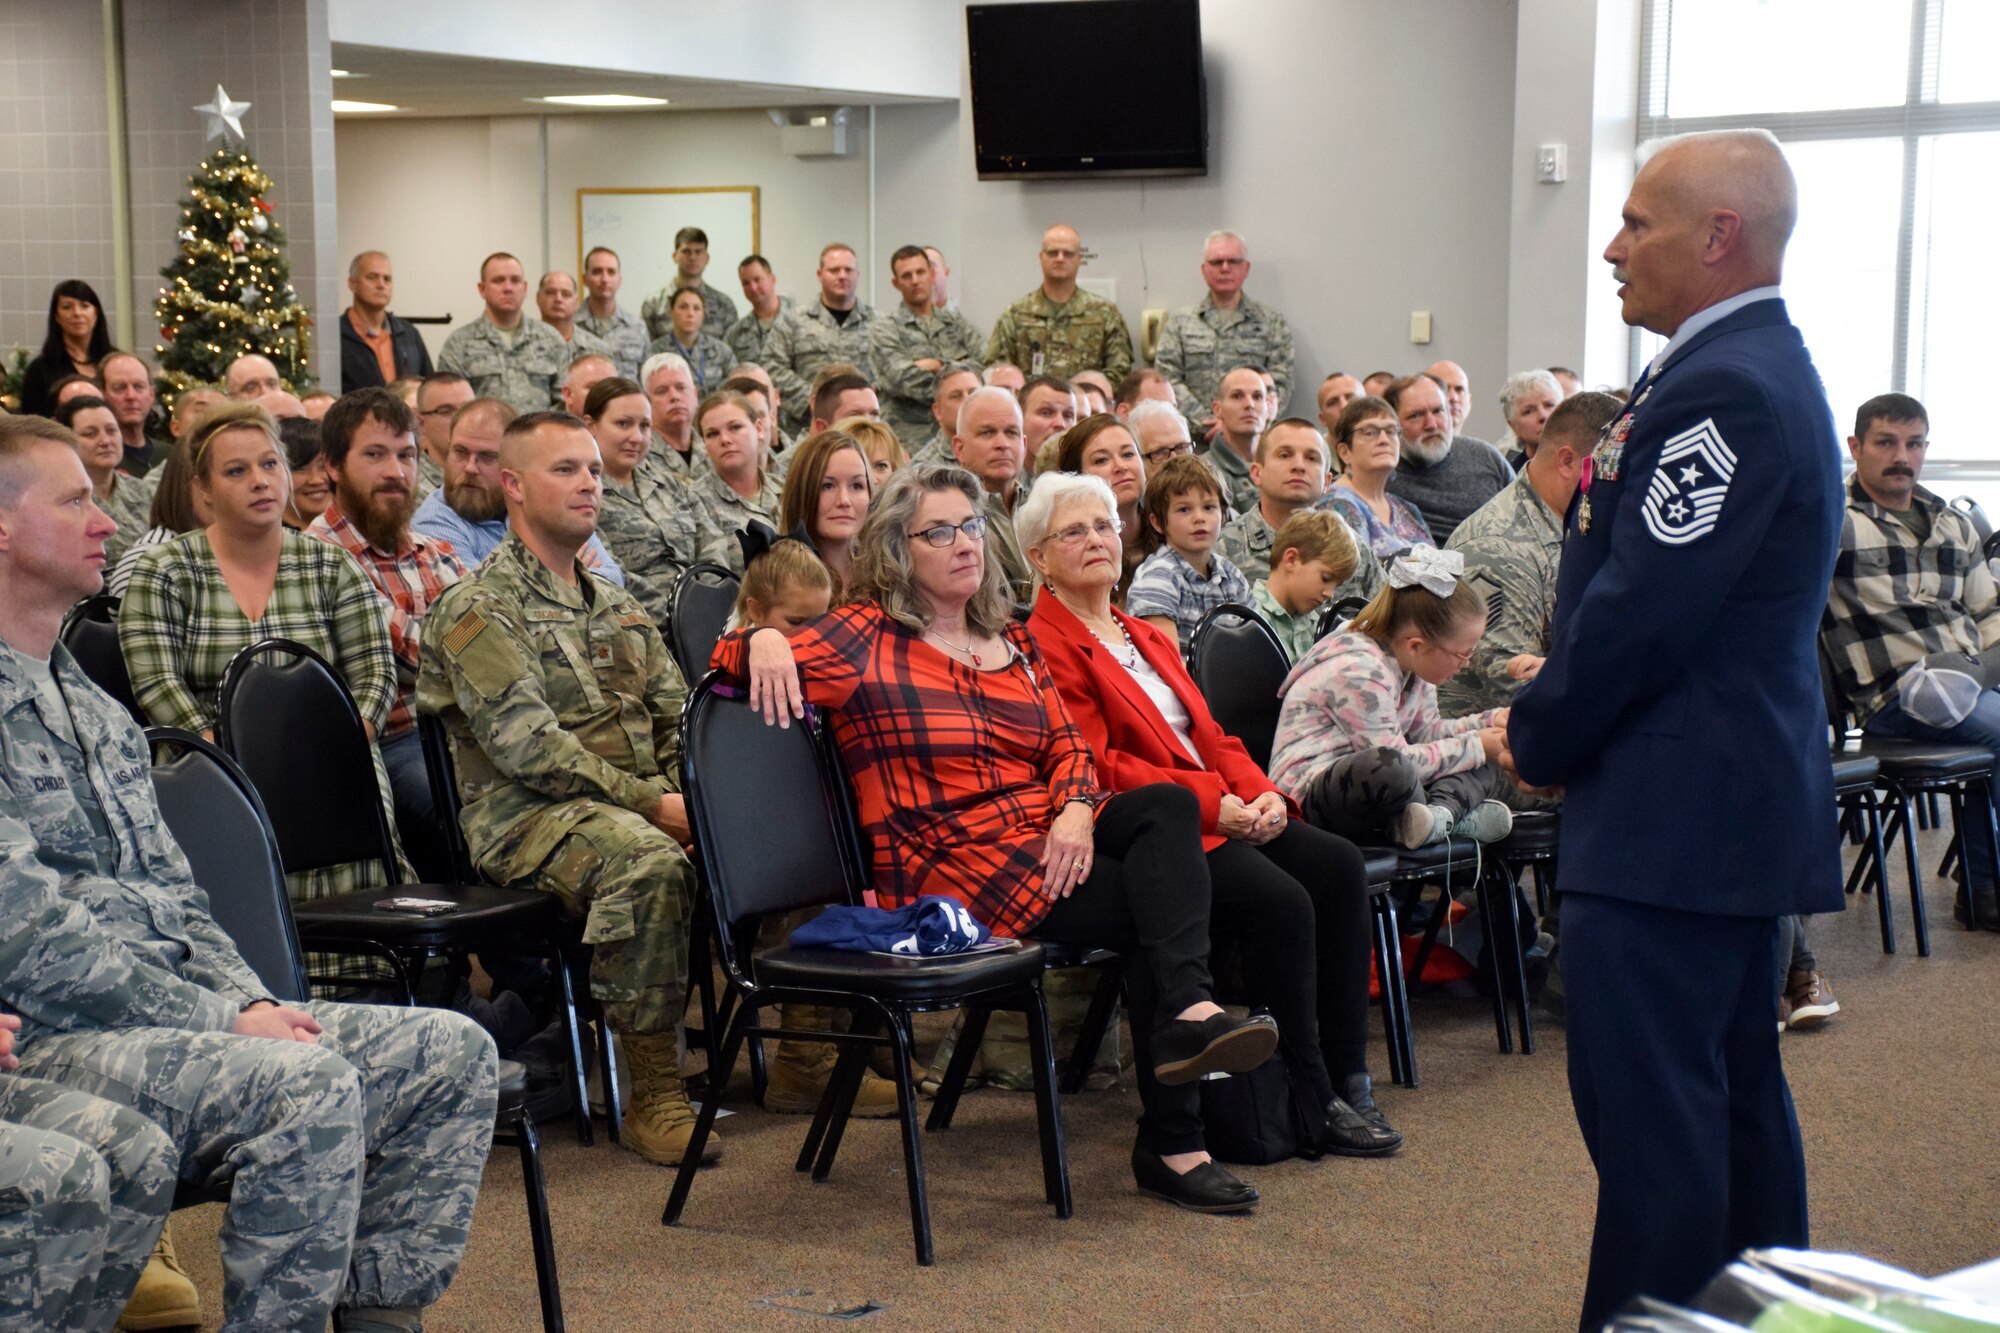 Former Command Chief Master (CCM) Sgt. Timothy E. Cochran speaks during his retirement ceremony held in the Dining Facility at the 132d Wing in Des Moines, Iowa on Saturday, December 7, 2019.  Cochran is the 6th CCM of Iowa; his successor, CCM Thomas (T.J.) Fennell assumed responsibility in November.  (Air National Guard photo by Tech. Sgt. Linda K. Burger/Released)